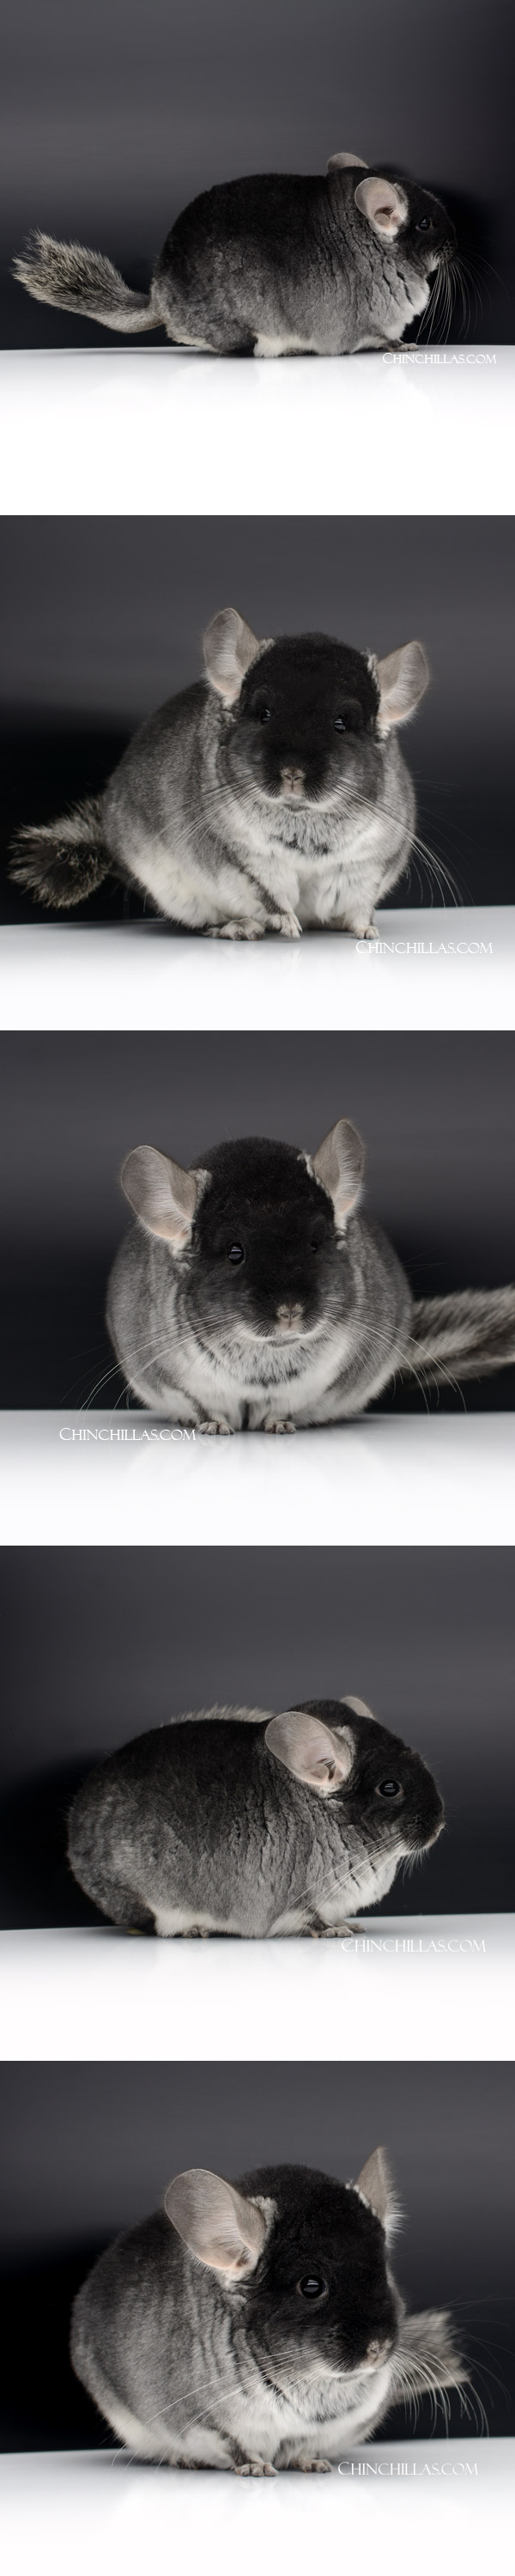 Chinchilla or related item offered for sale or export on Chinchillas.com - 000044 Large Blocky Herd Improvement Quality Black Velvet Male Chinchilla